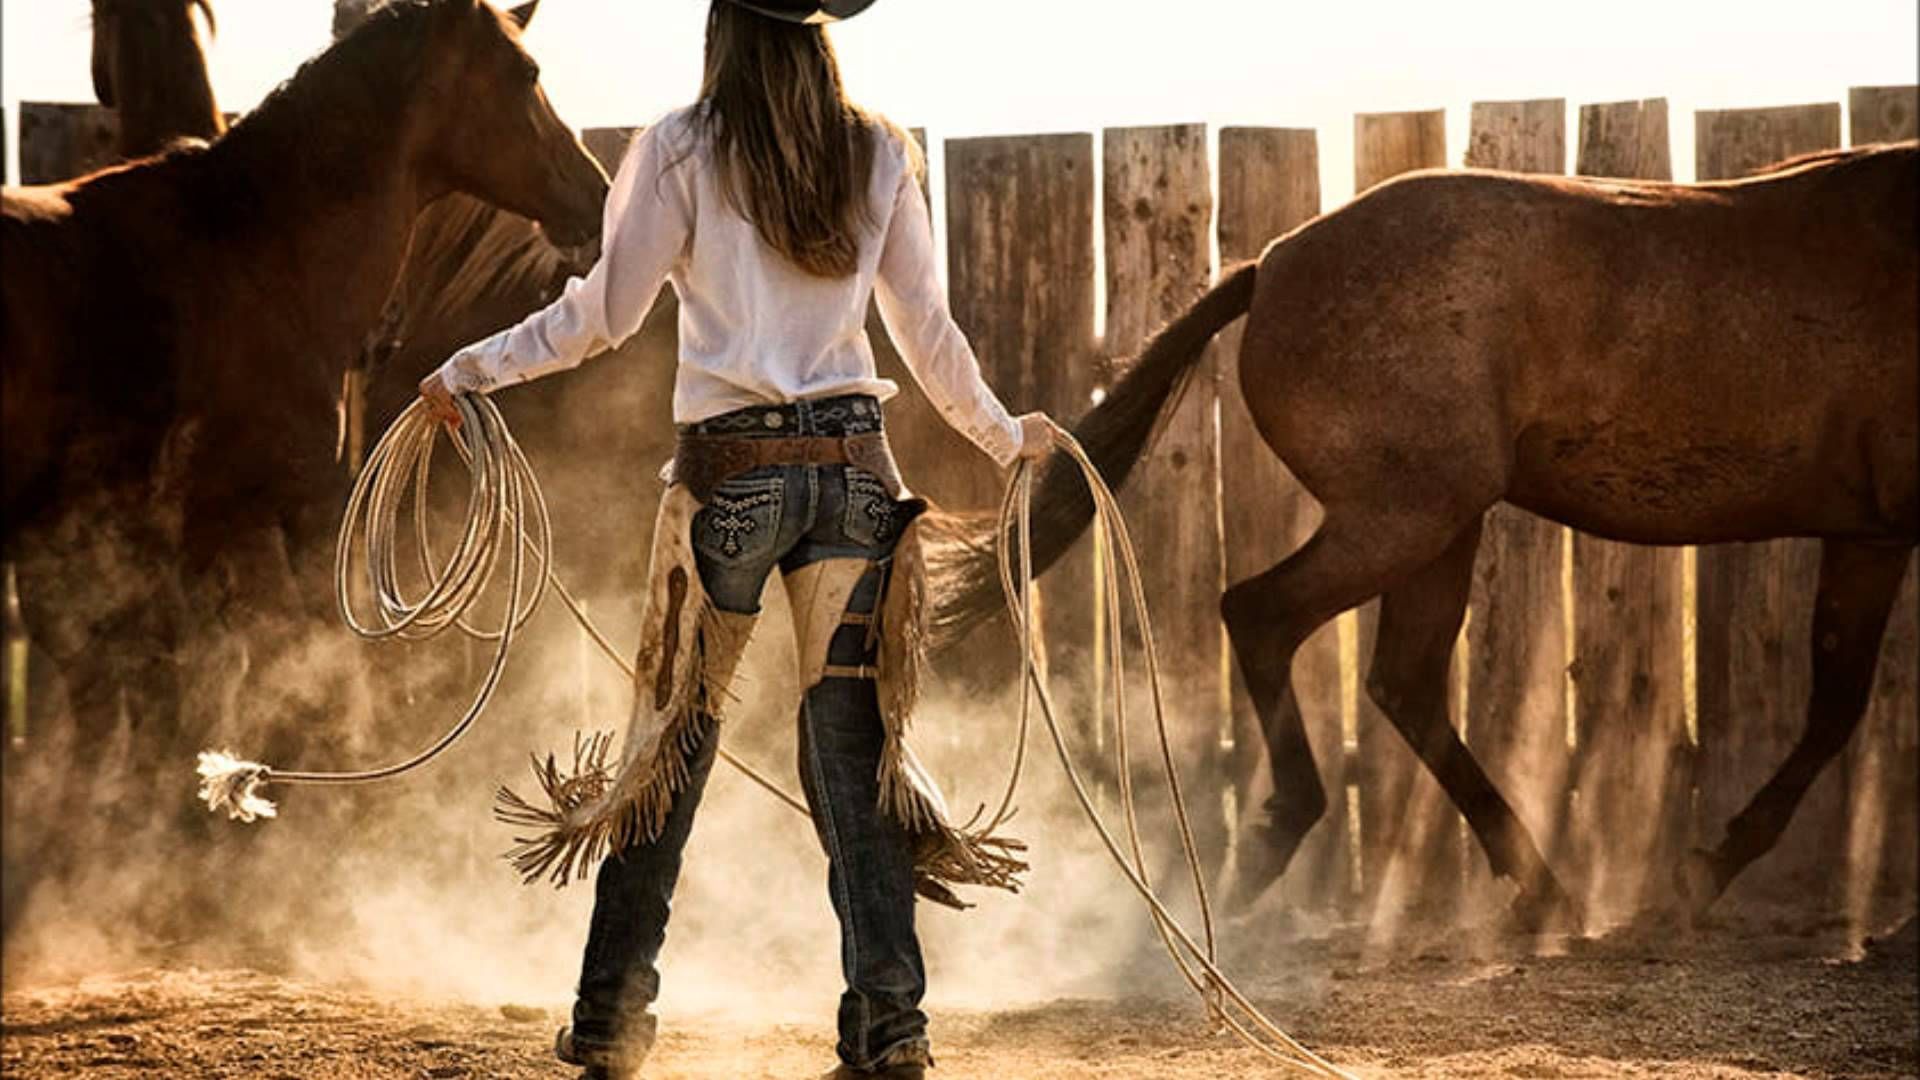 Free Cowgirl HD Wallpaper. Horse love, Horses, Cowgirl and horse